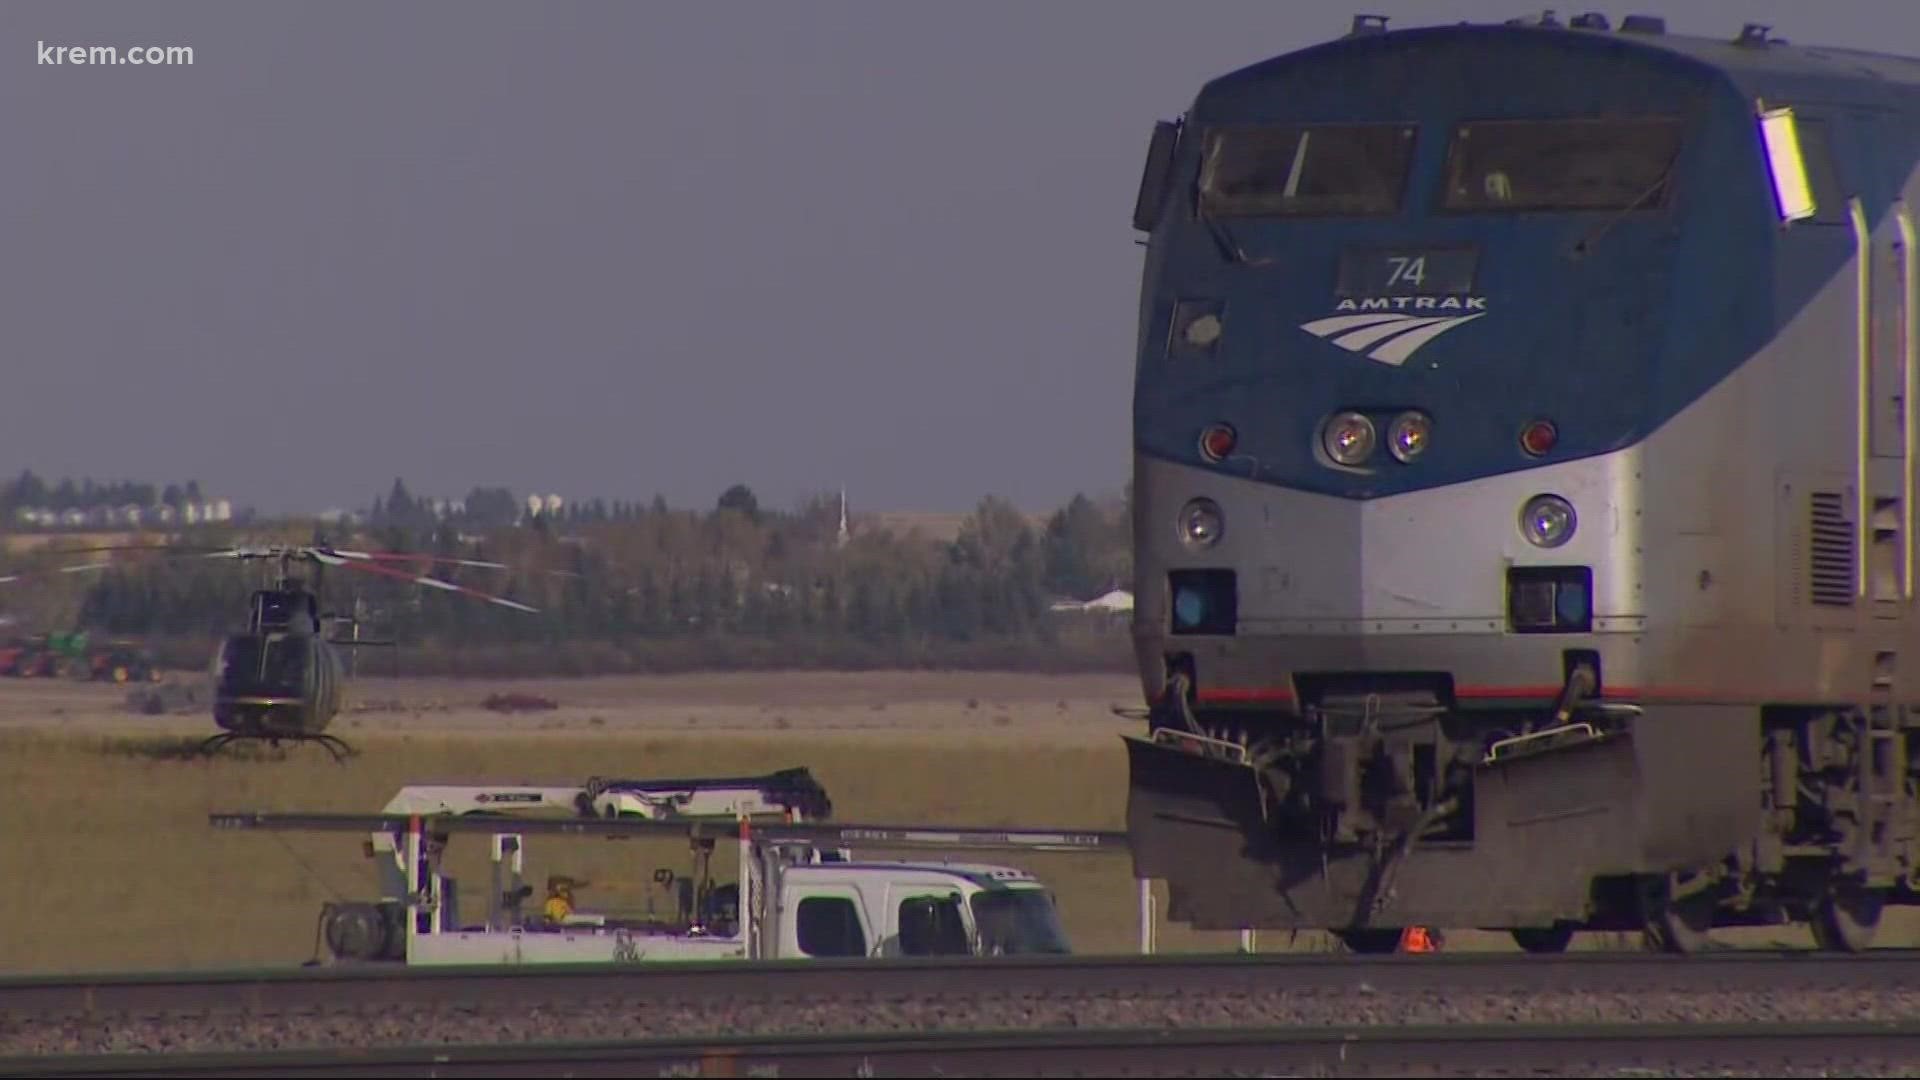 An Amtrak train carrying more than 100 people derailed in Montana, killing at least three people. Amtrak said there were injuries reported among passengers and crew.